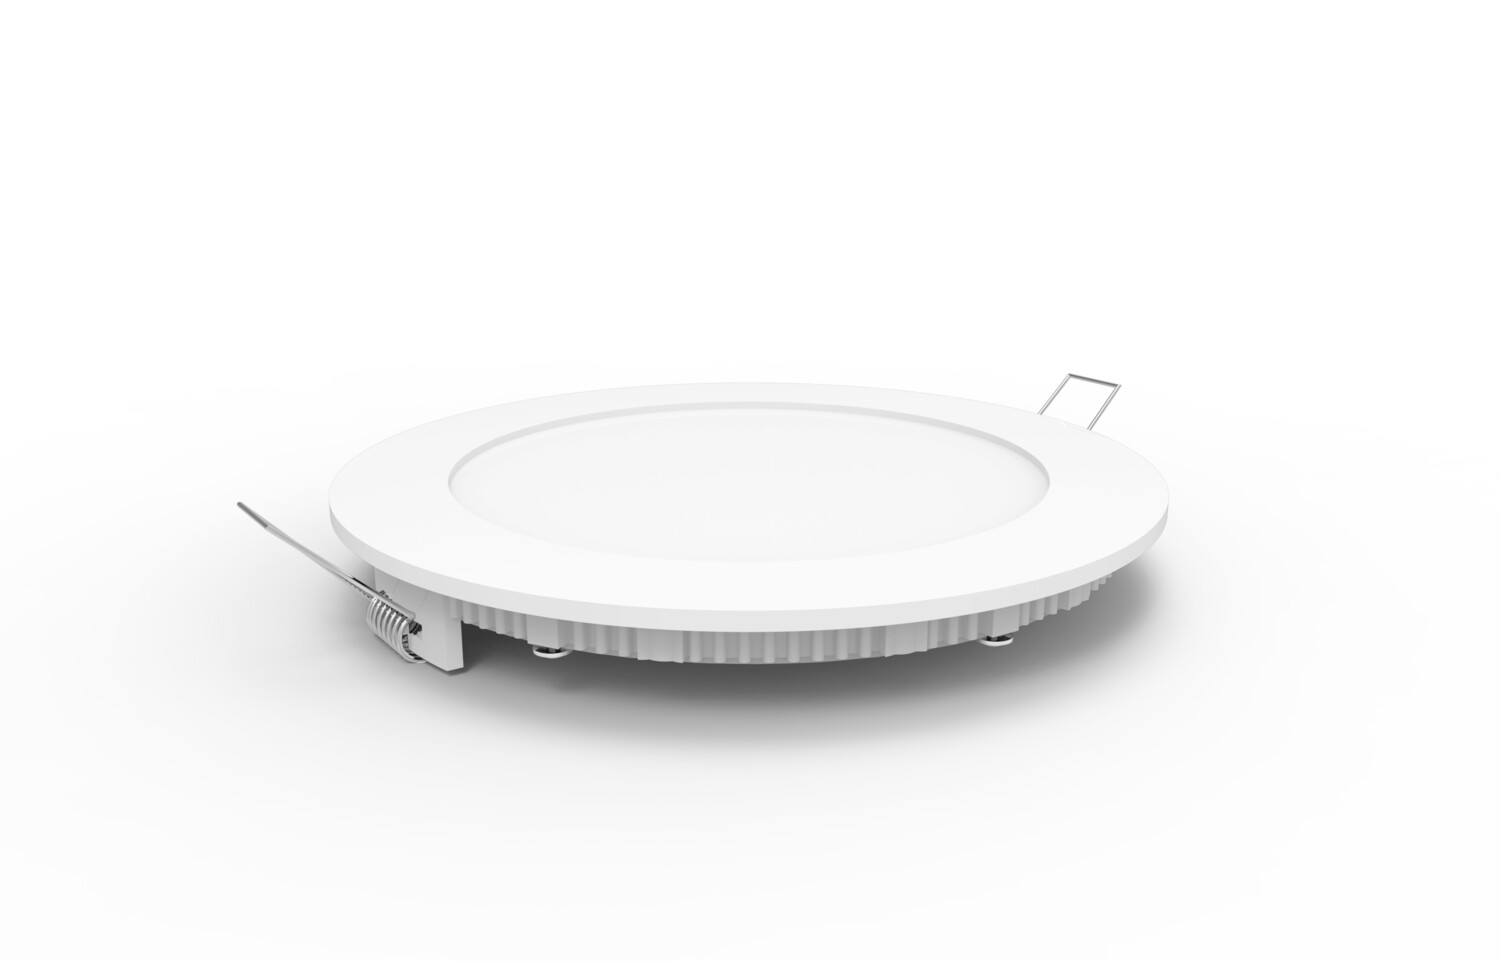 Intego Recessed Ecovision, 170mm, Round, 12W LED